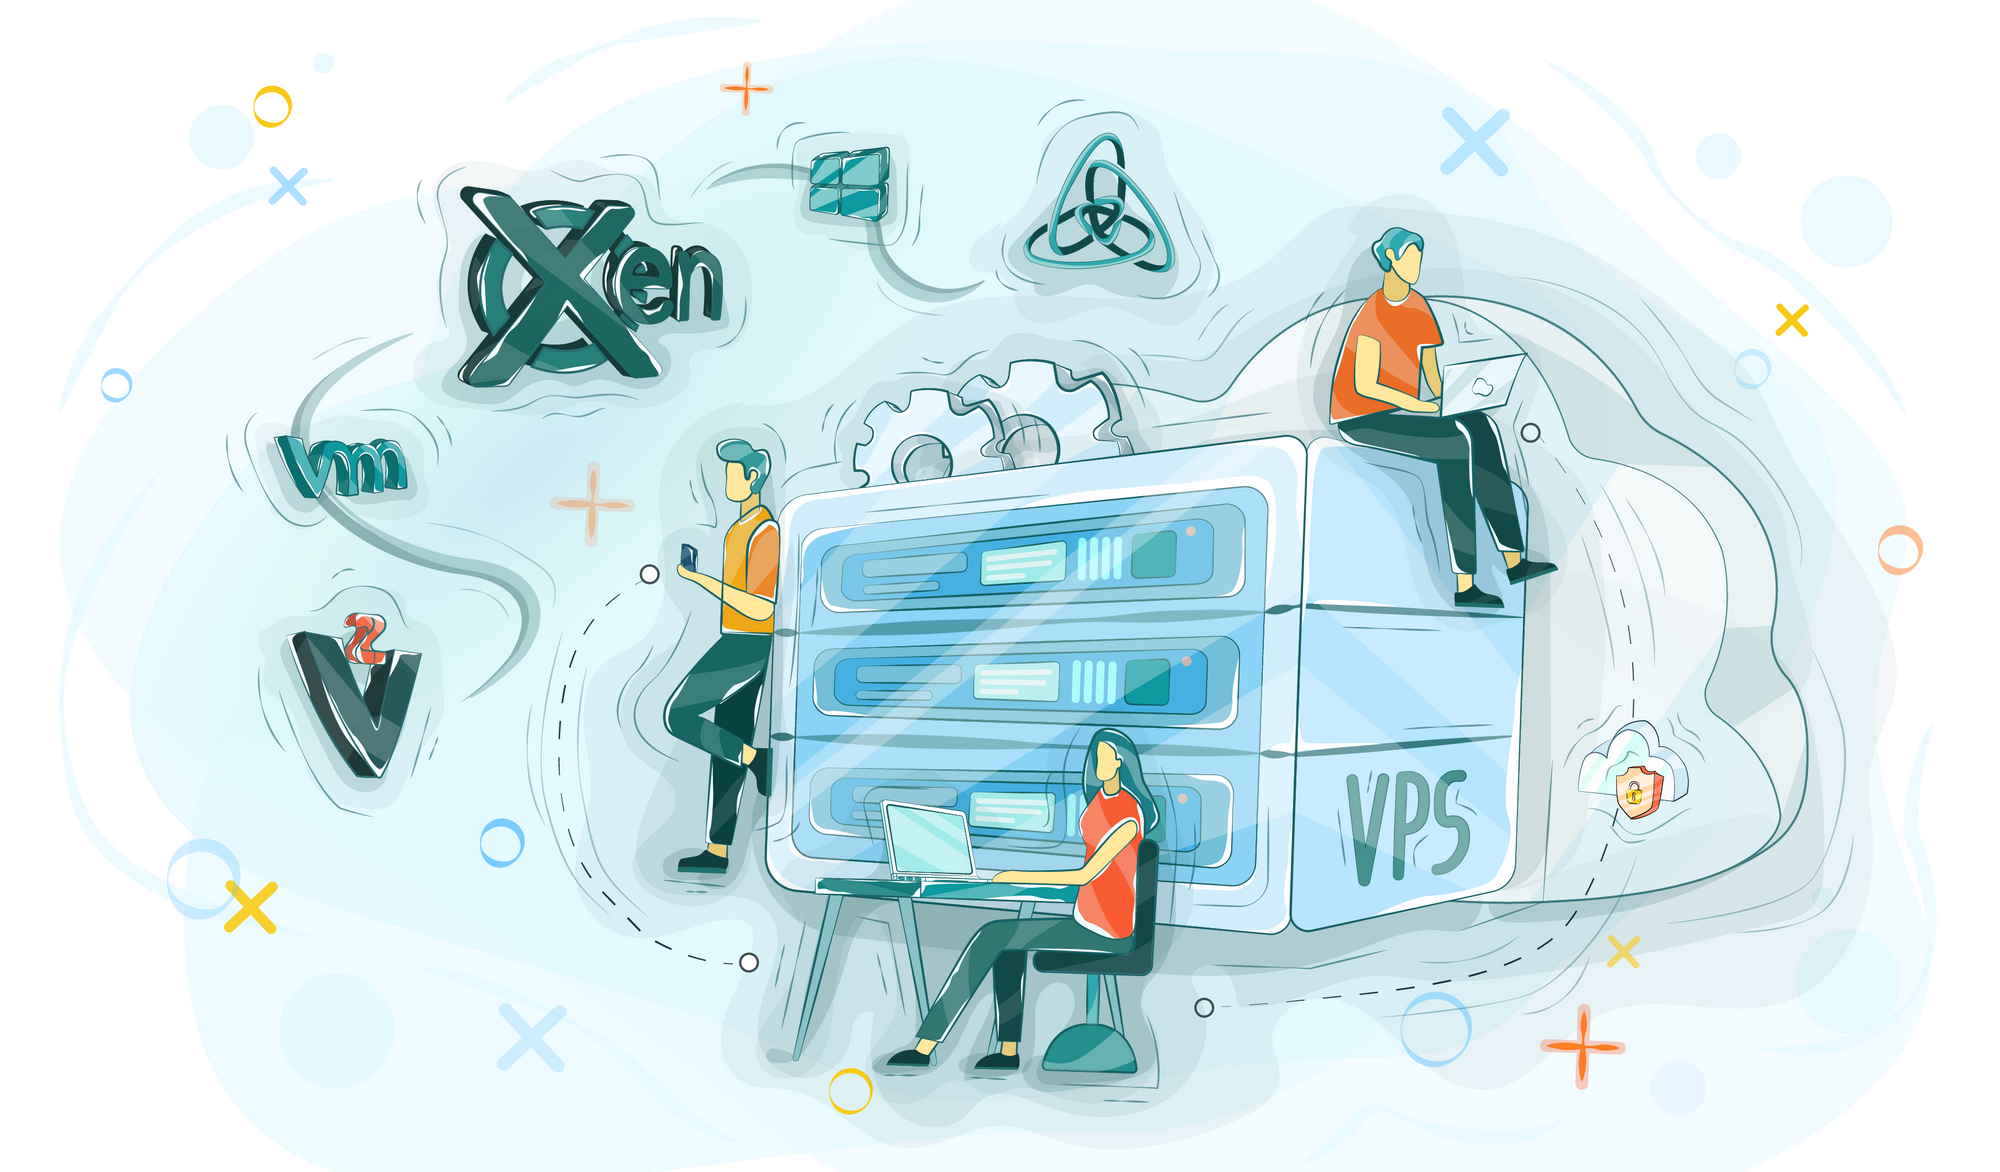 Virtualization types for VPS and VDS